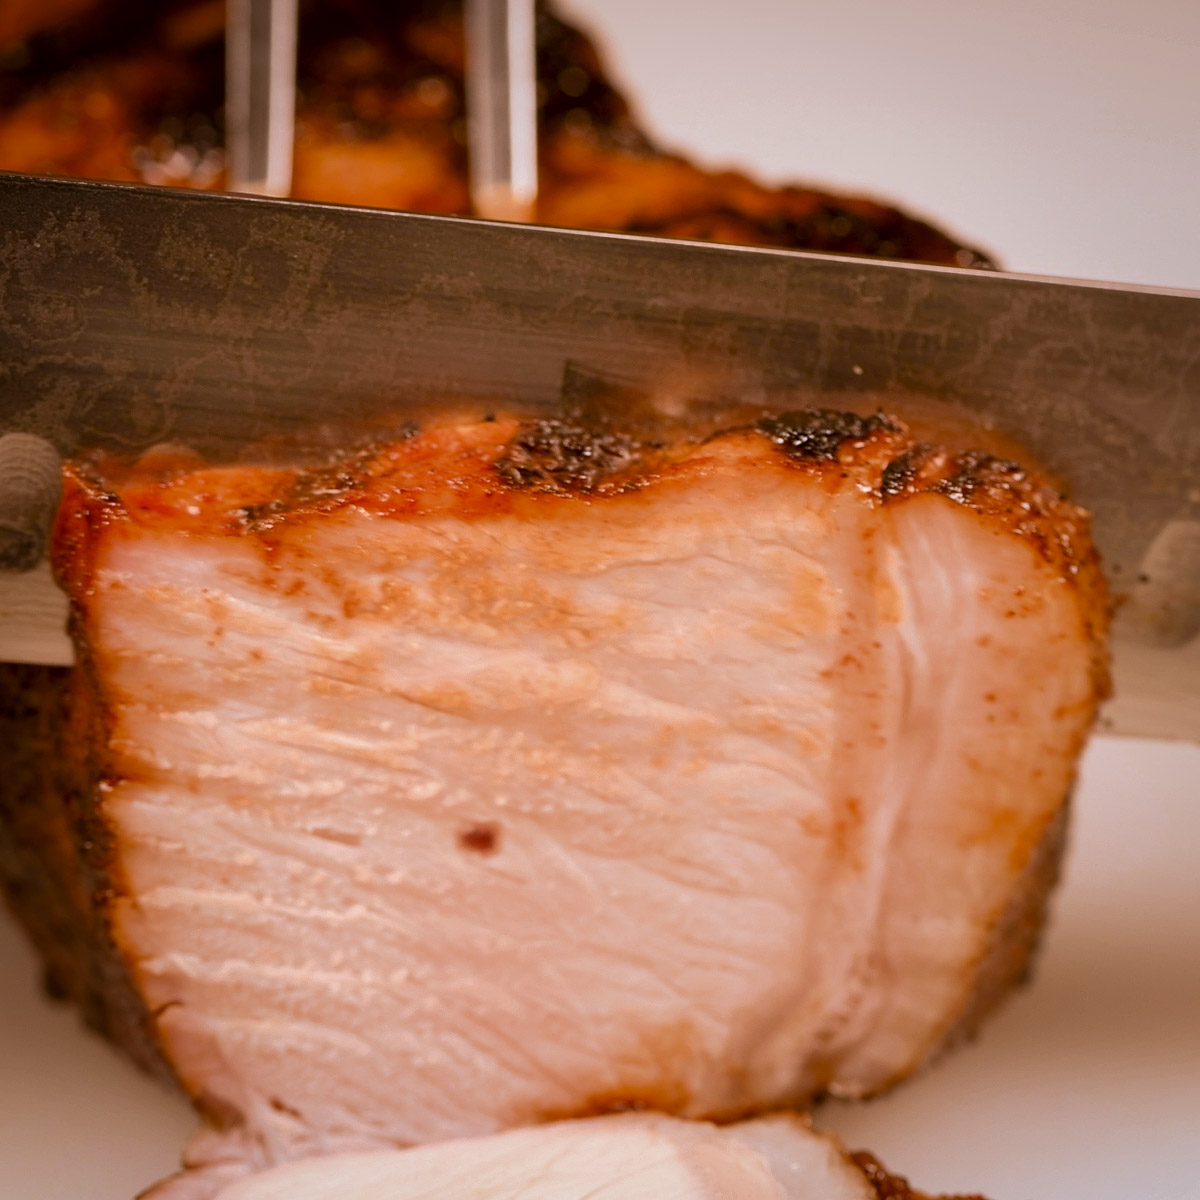 Slicing a cooked pork chop.